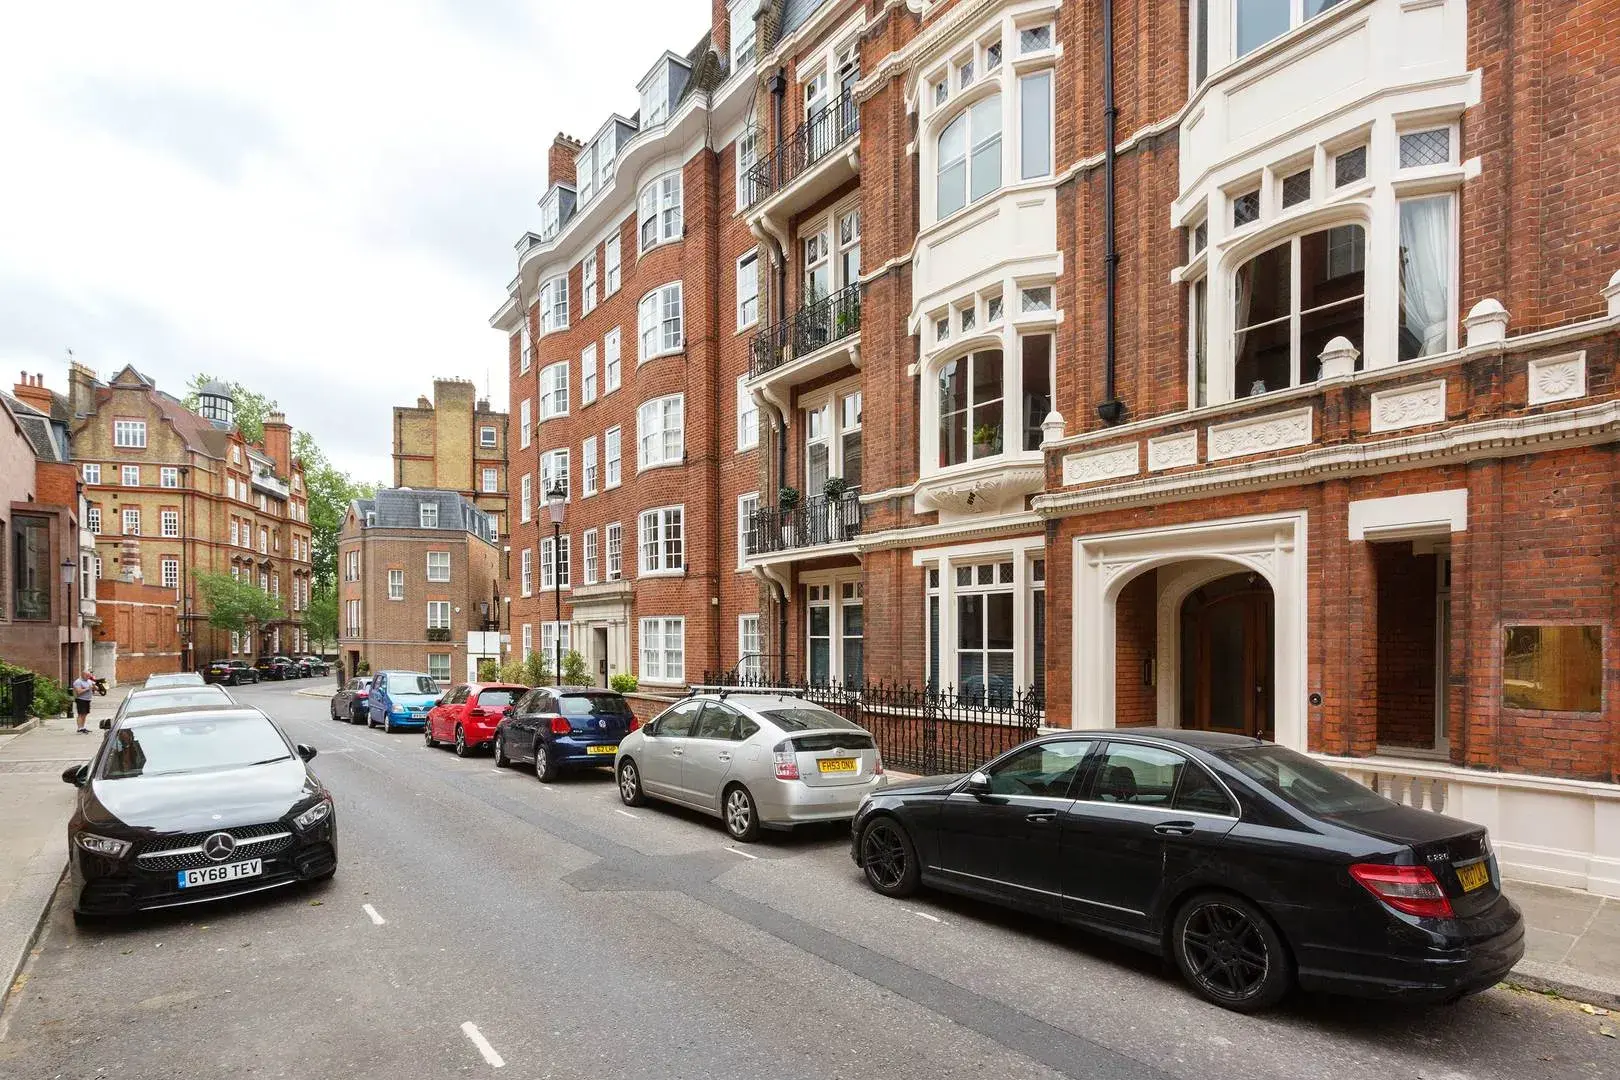 Tite Street, holiday home in Chelsea, London